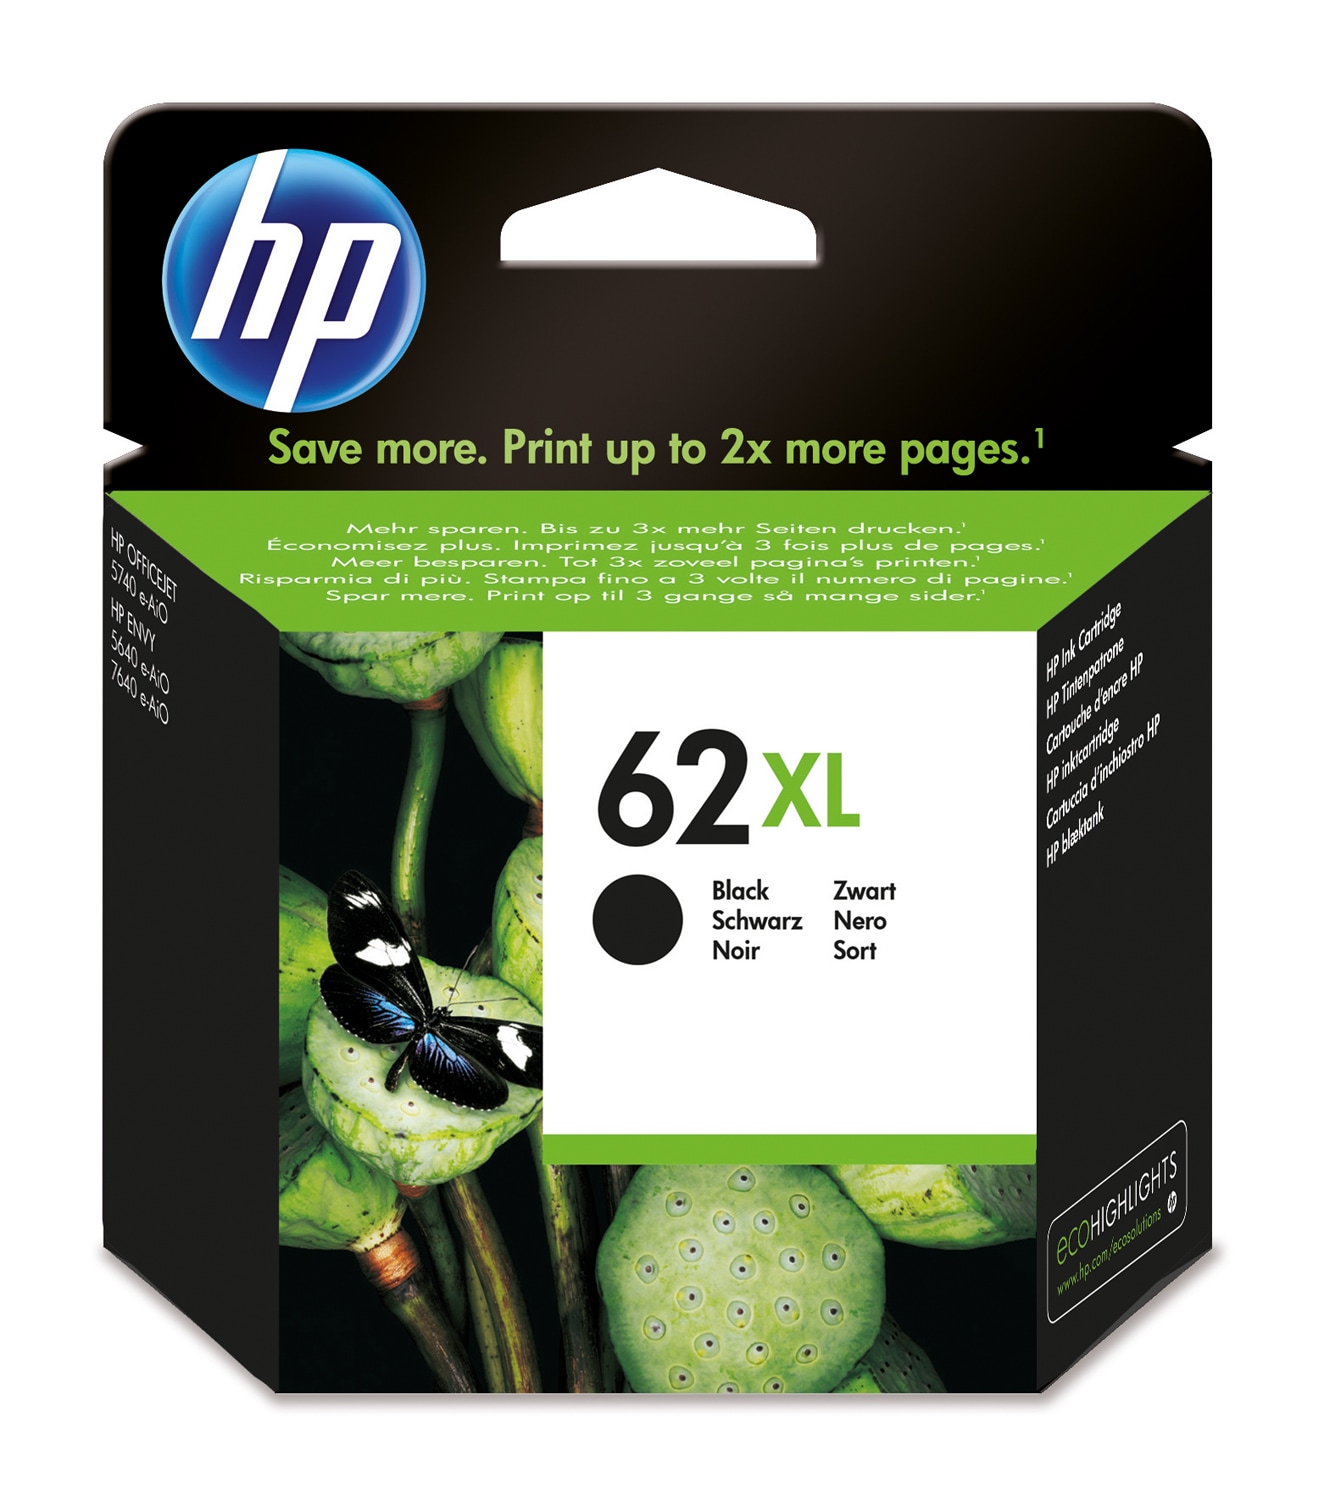 62xl Ink Cartridges For HP Ink 62 xl Envy 7640 Printer for HP 62xl